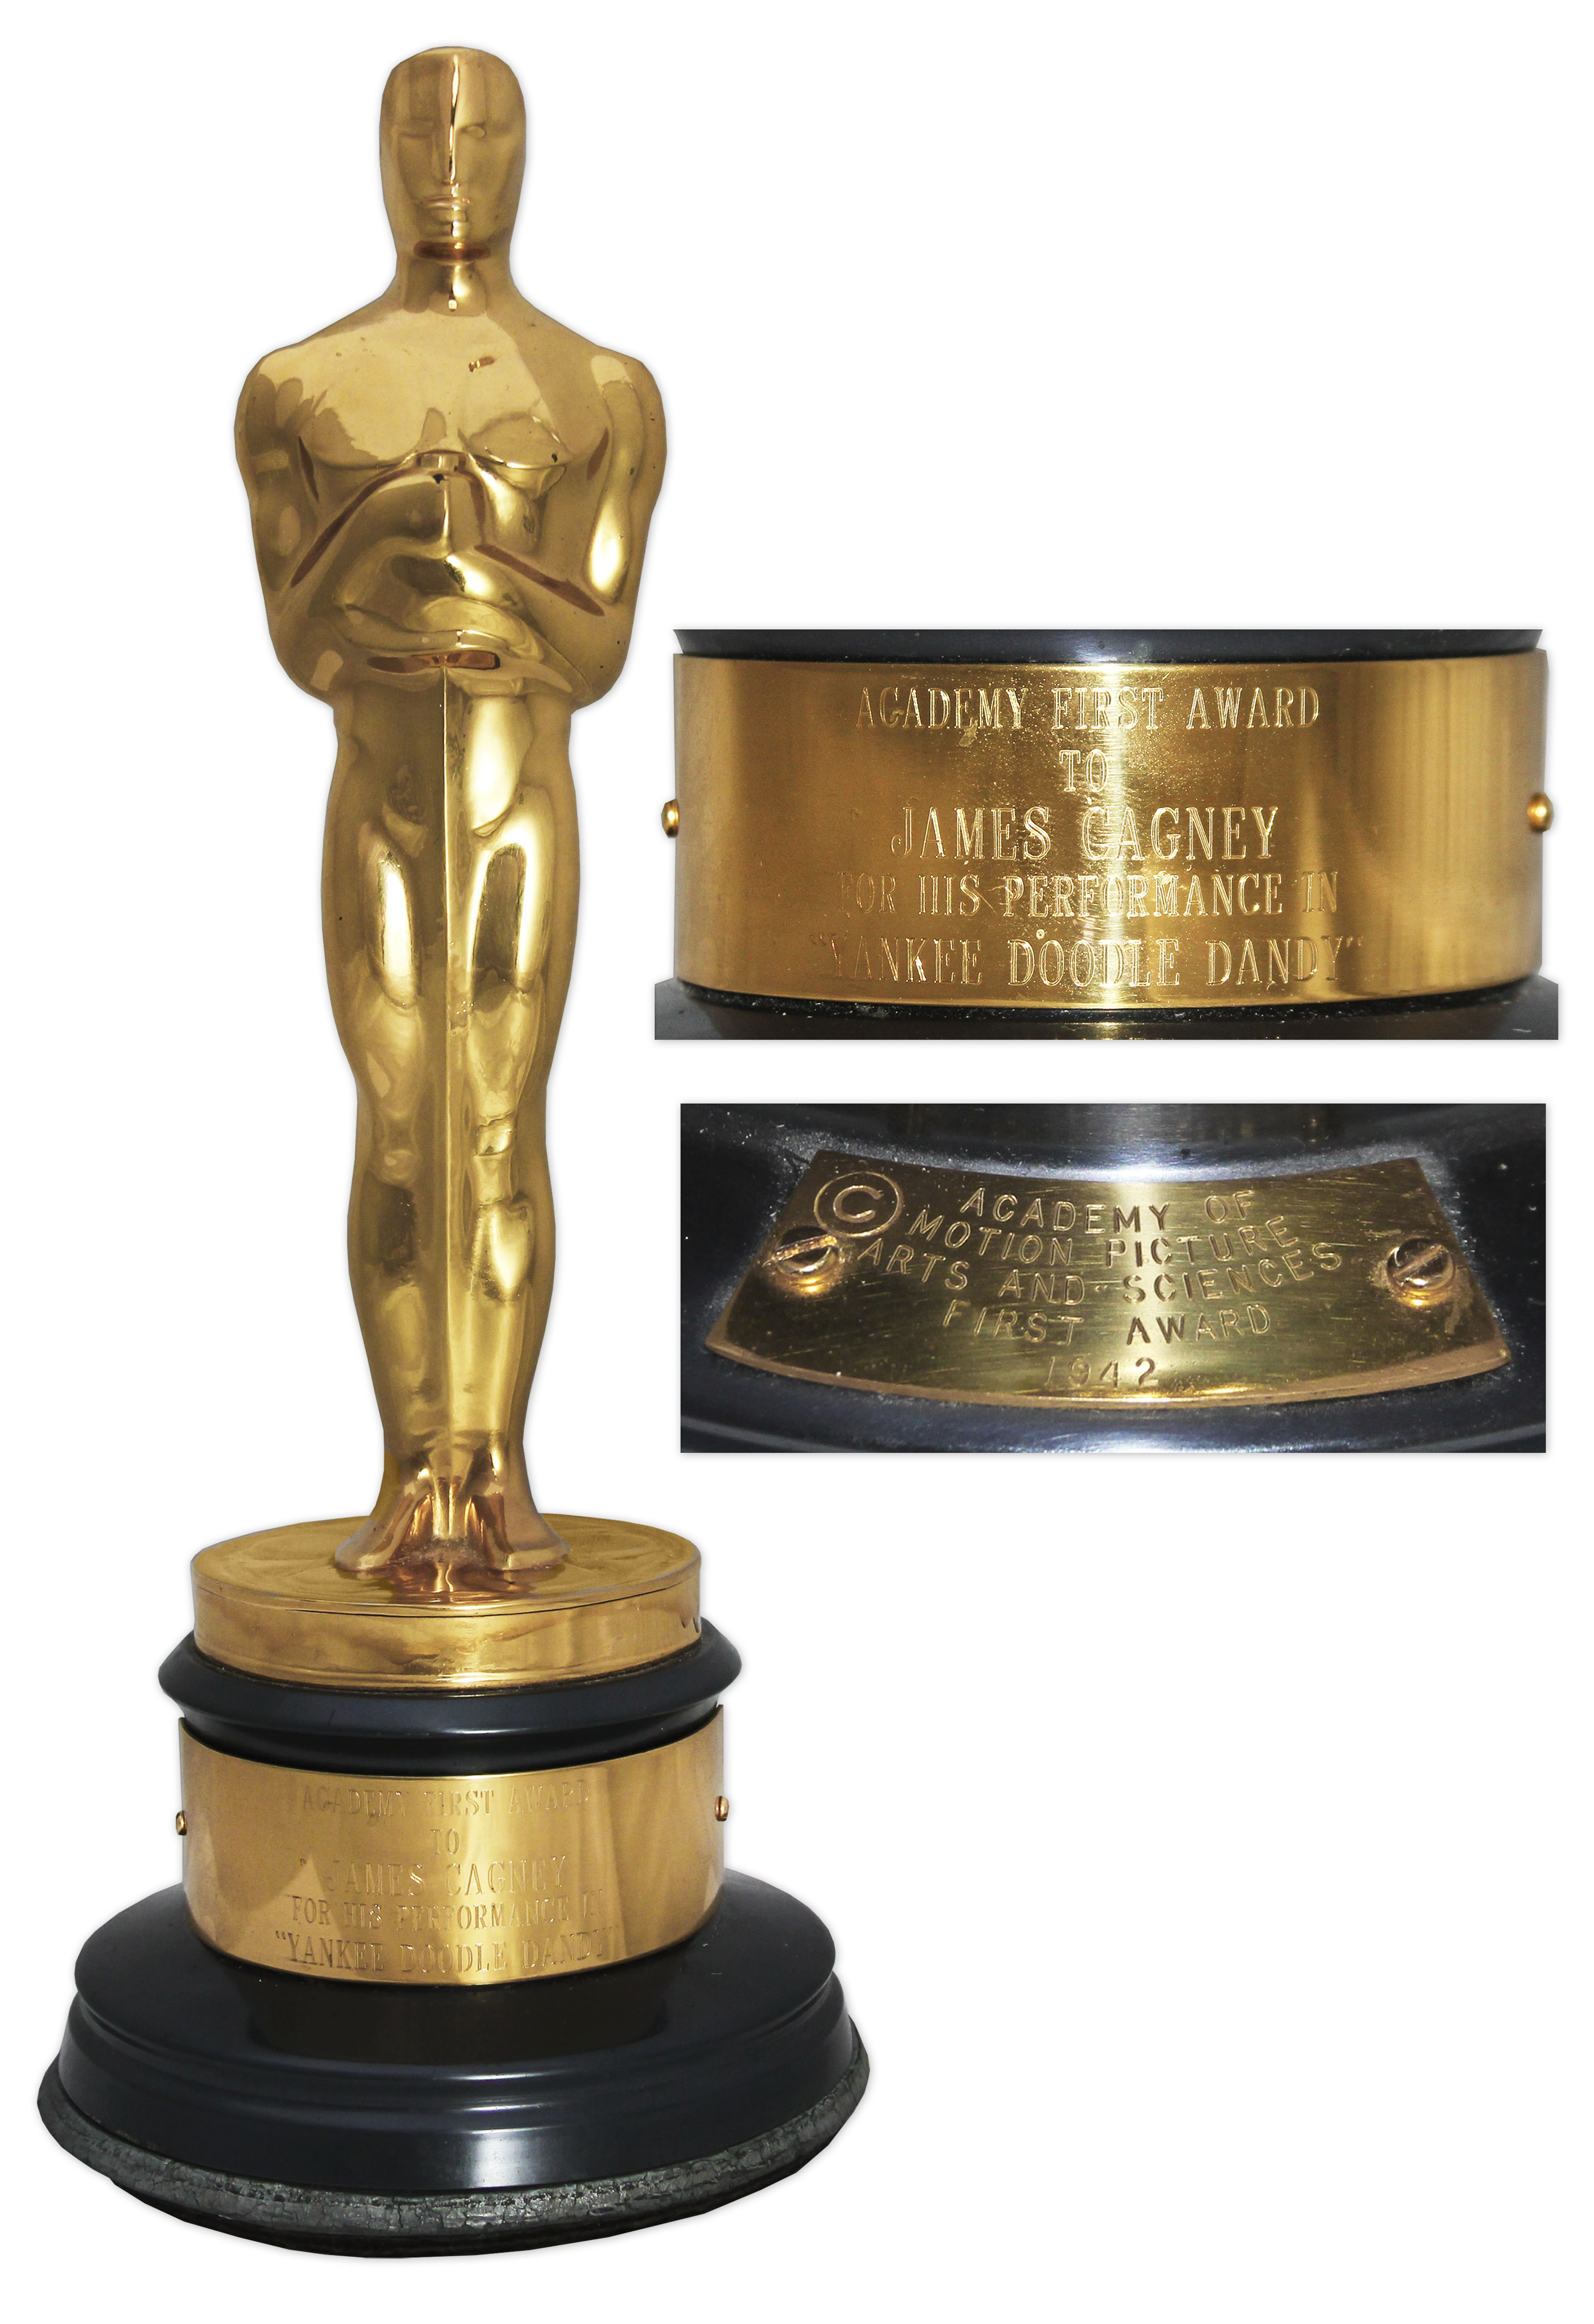 James Cagney memorabilia Academy Award for Best Actor Won by James Cagney in 1942 For "Yankee Doodle Dandy" -- Considered One of the Best Performances in One of the Best Movies of All Time